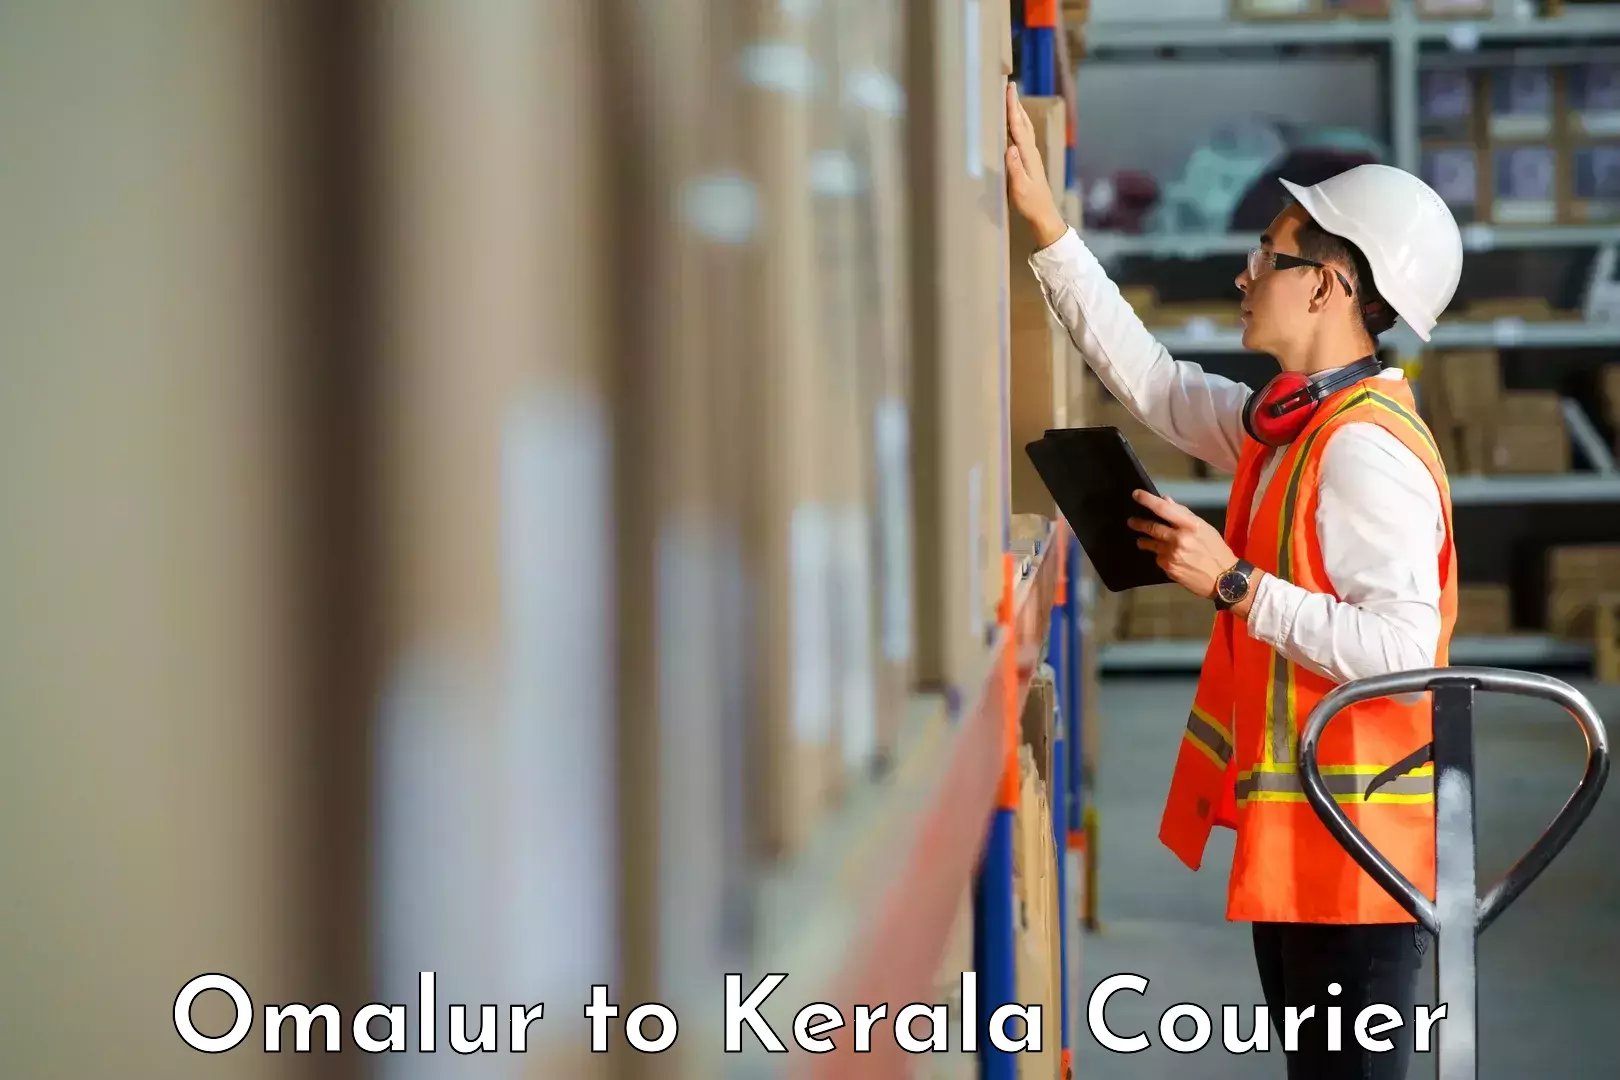 Large-scale shipping solutions Omalur to Kochi